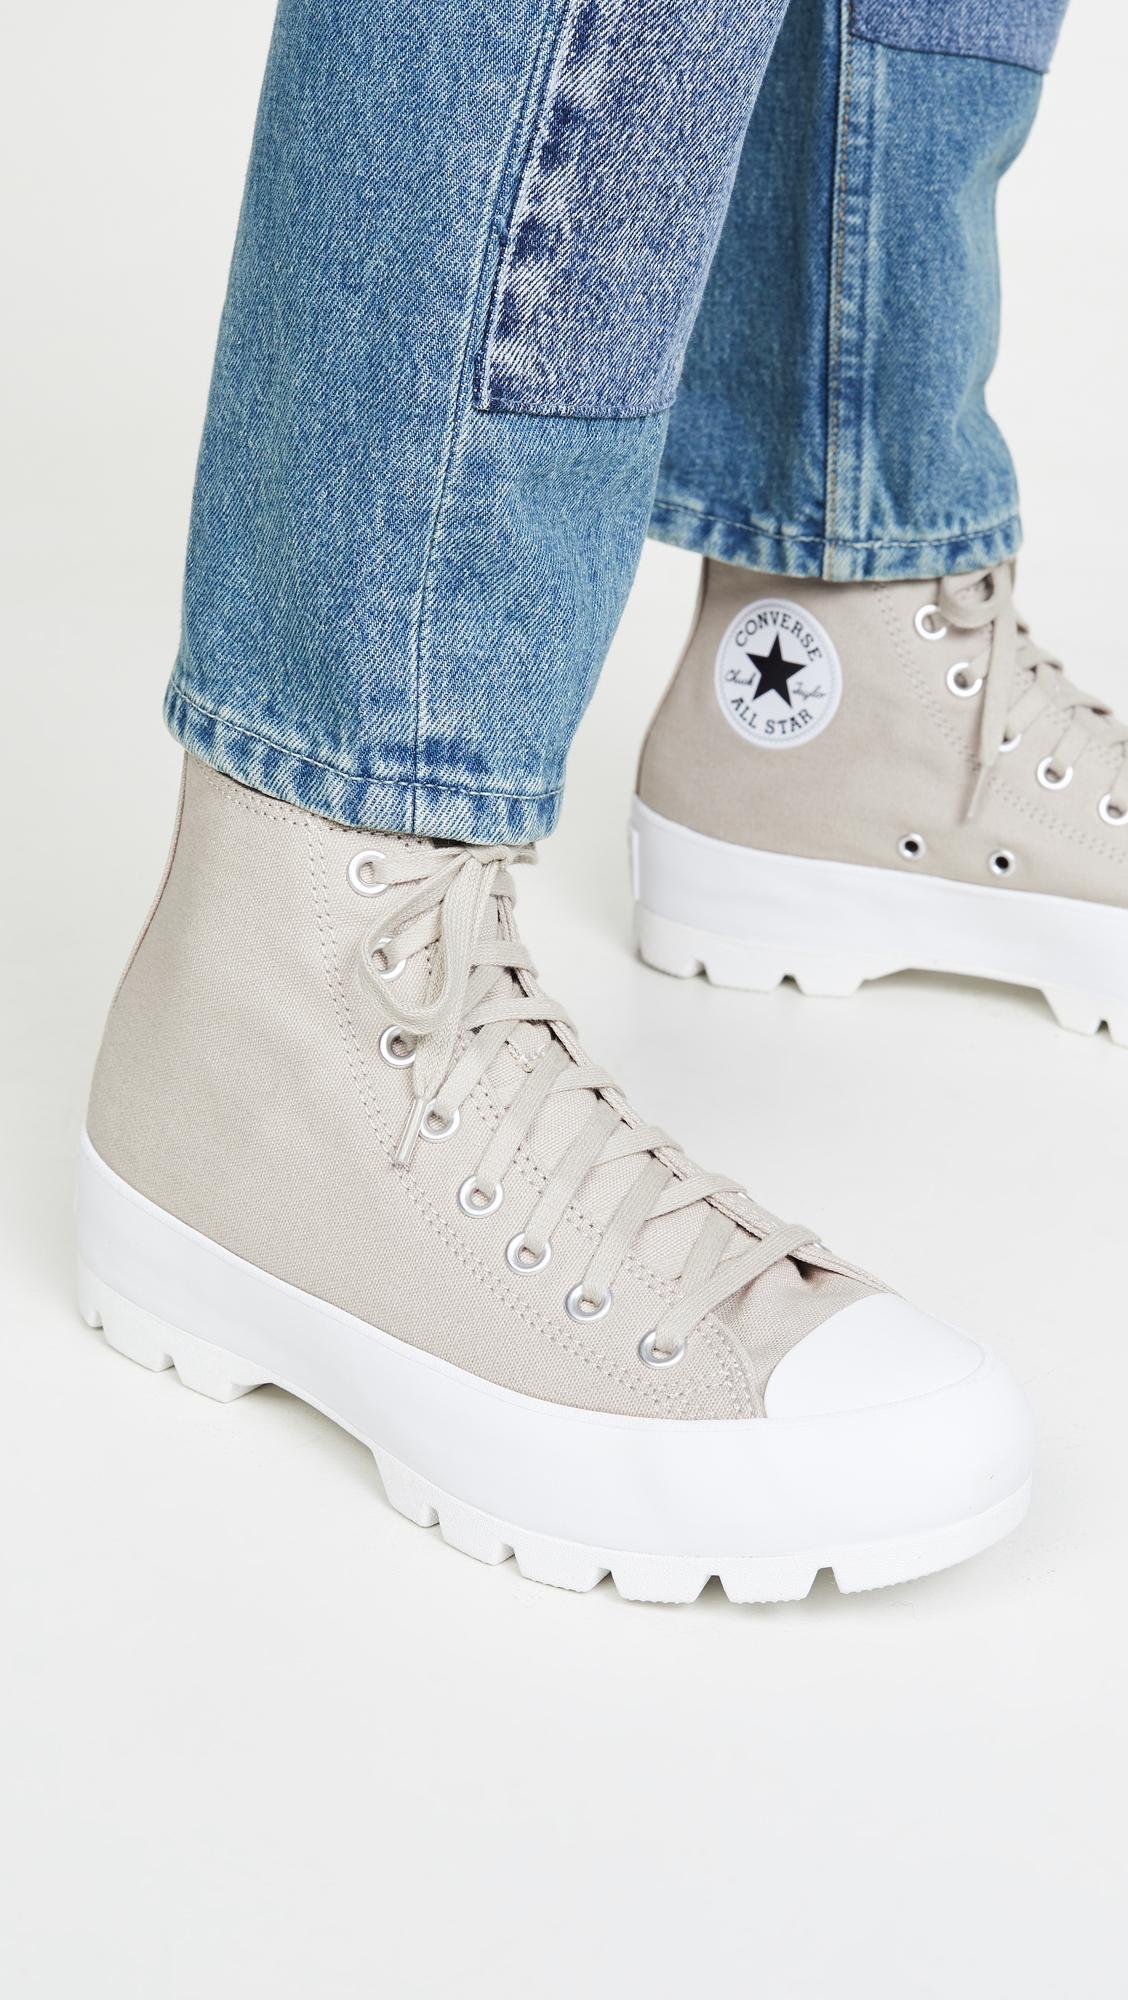 Converse Canvas Chuck Taylor All Star Lugged Sneaker Boots in ... لوتس